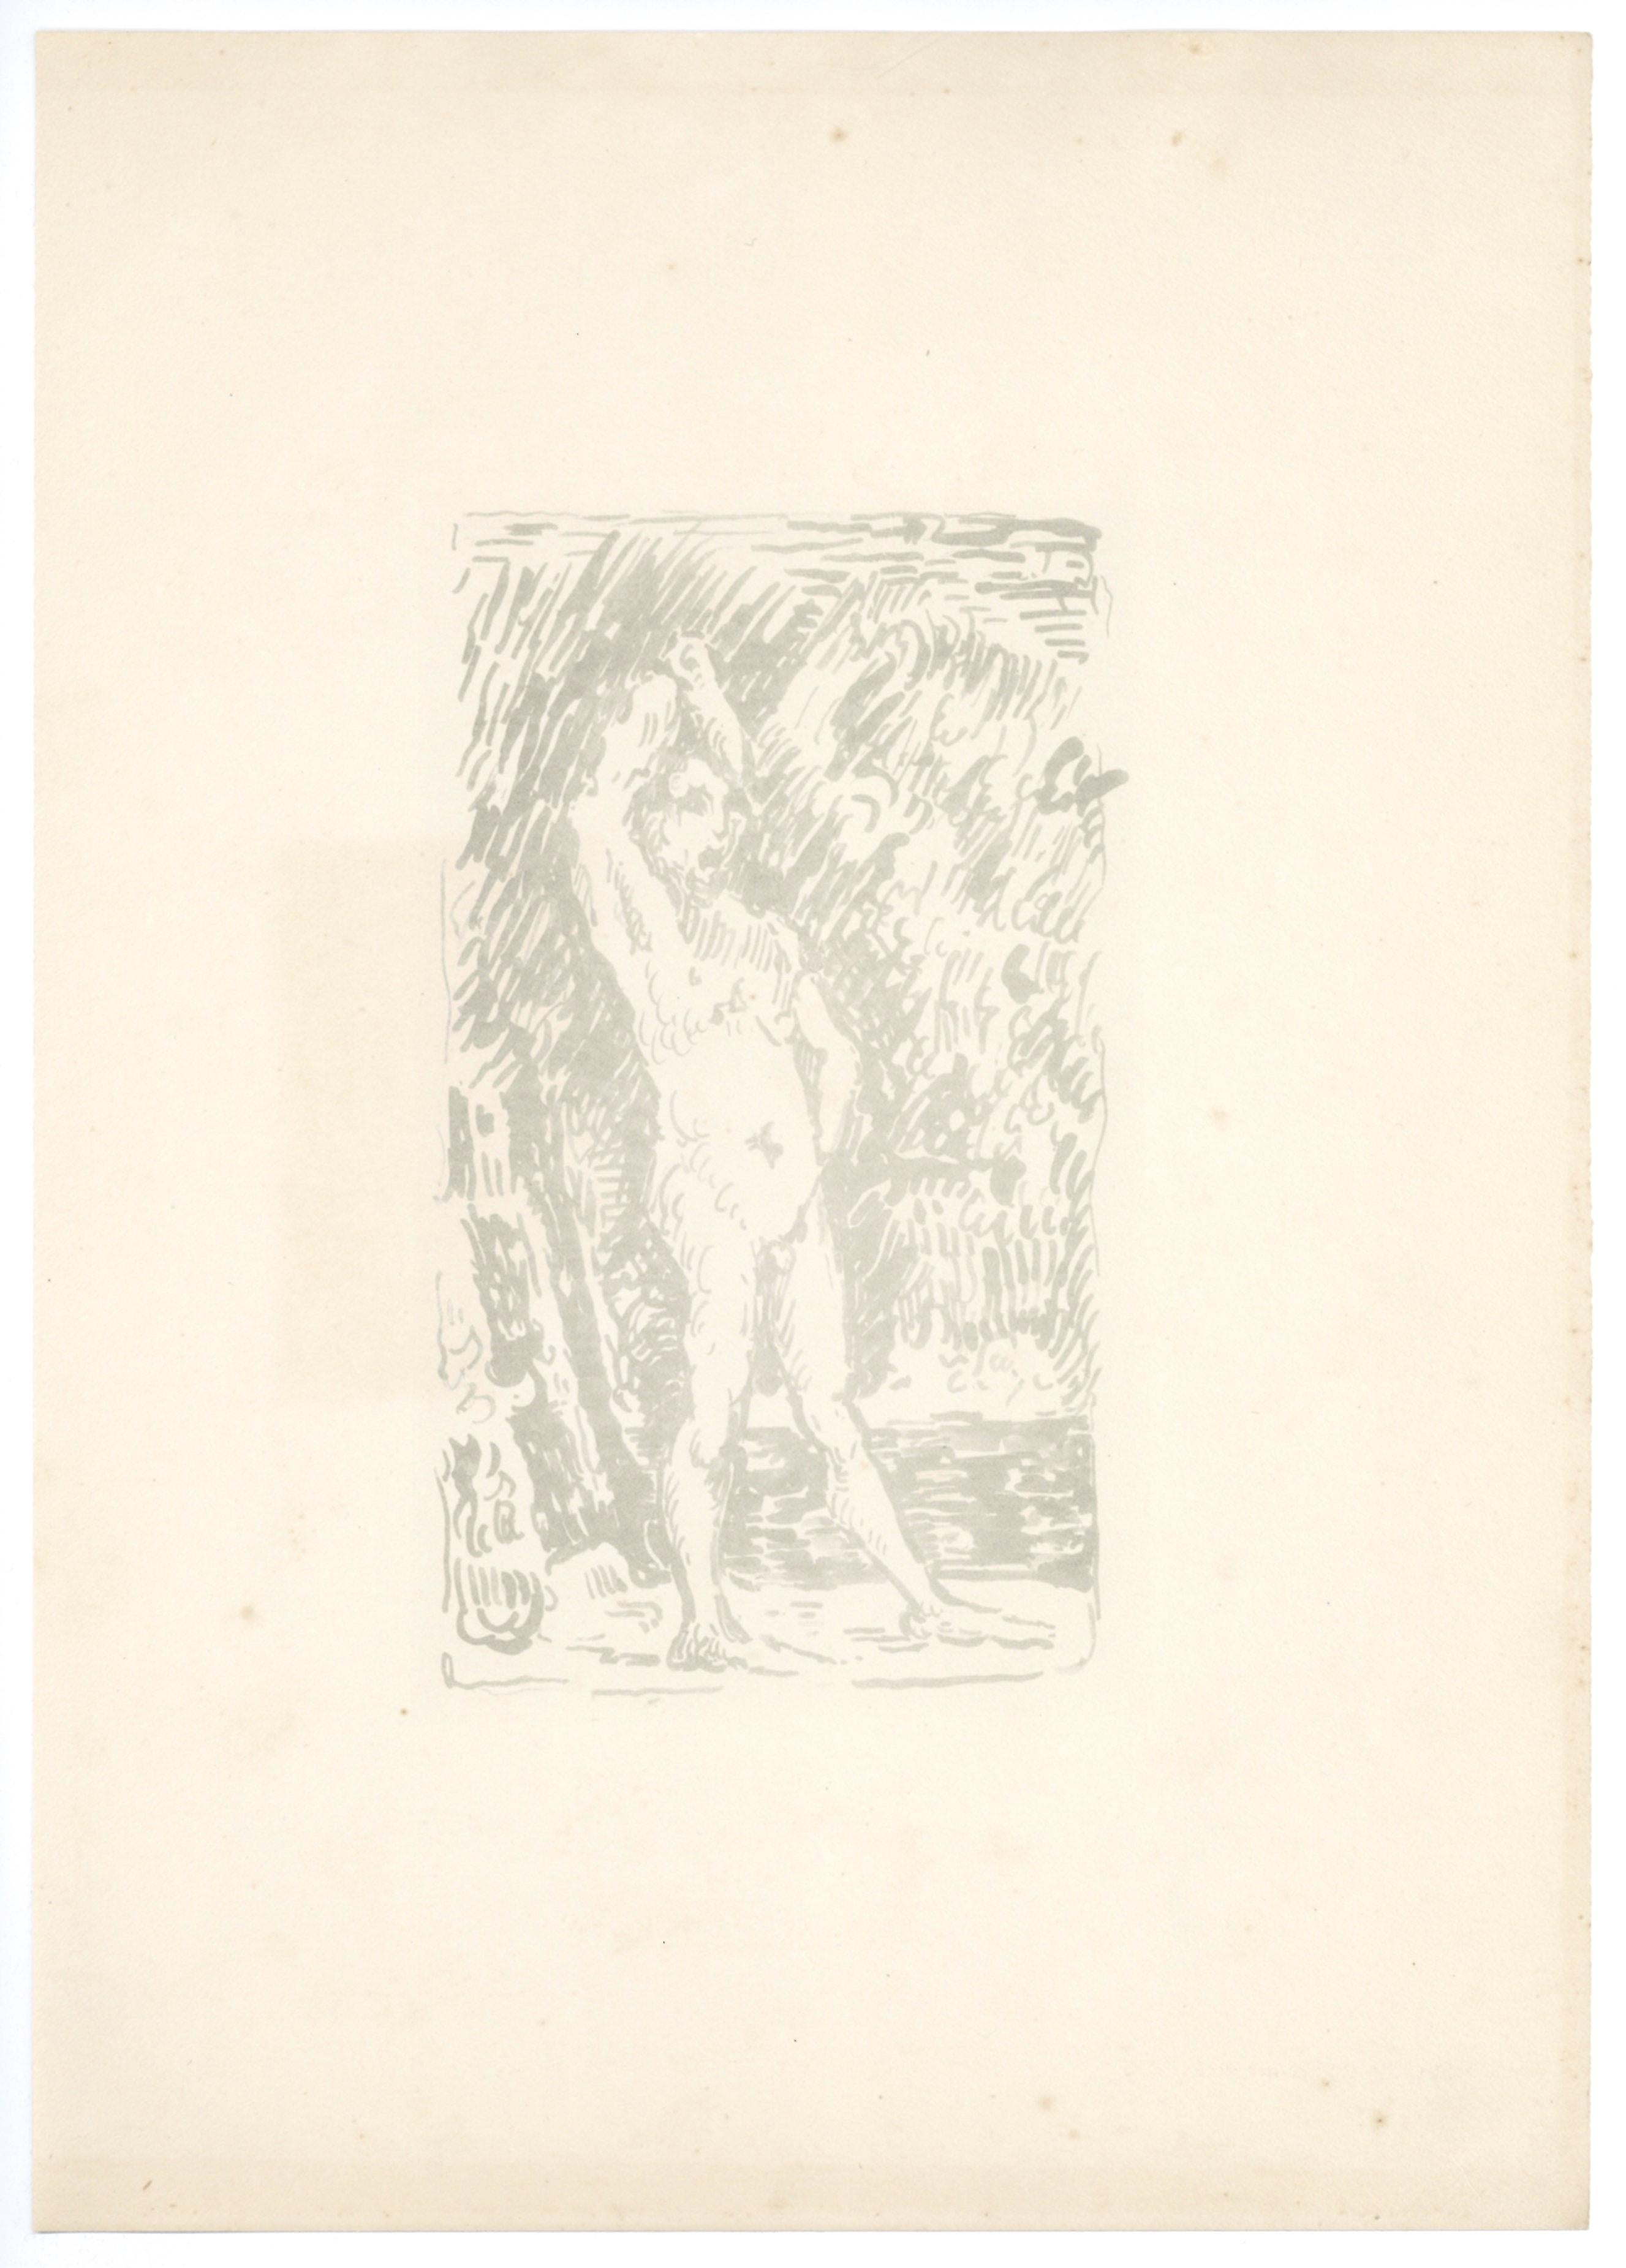 Medium: lithograph (after the drawing). This composition was executed by Paul Signac in homage to Paul Cezanne, printed in 1914 and published in Paris by Bernheim-Jeune for the rare volume "Cezanne". This impression is one of 400 printed on wove